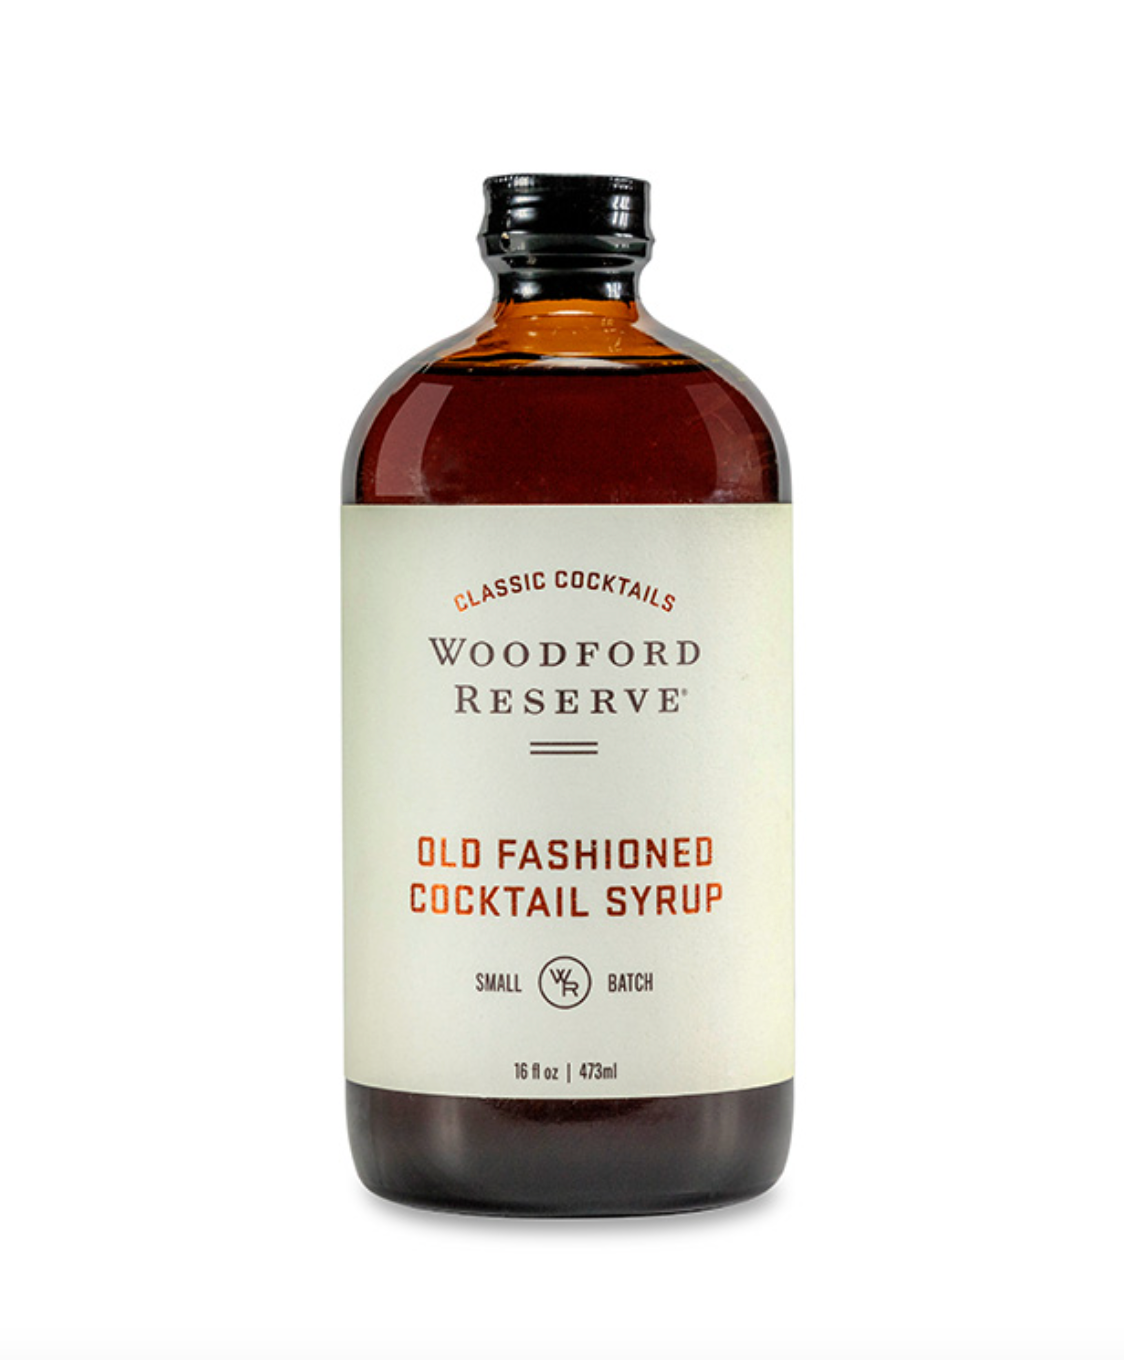 Woodford Reserve Old Fashioned Cocktail Syrup 16 fl.oz.